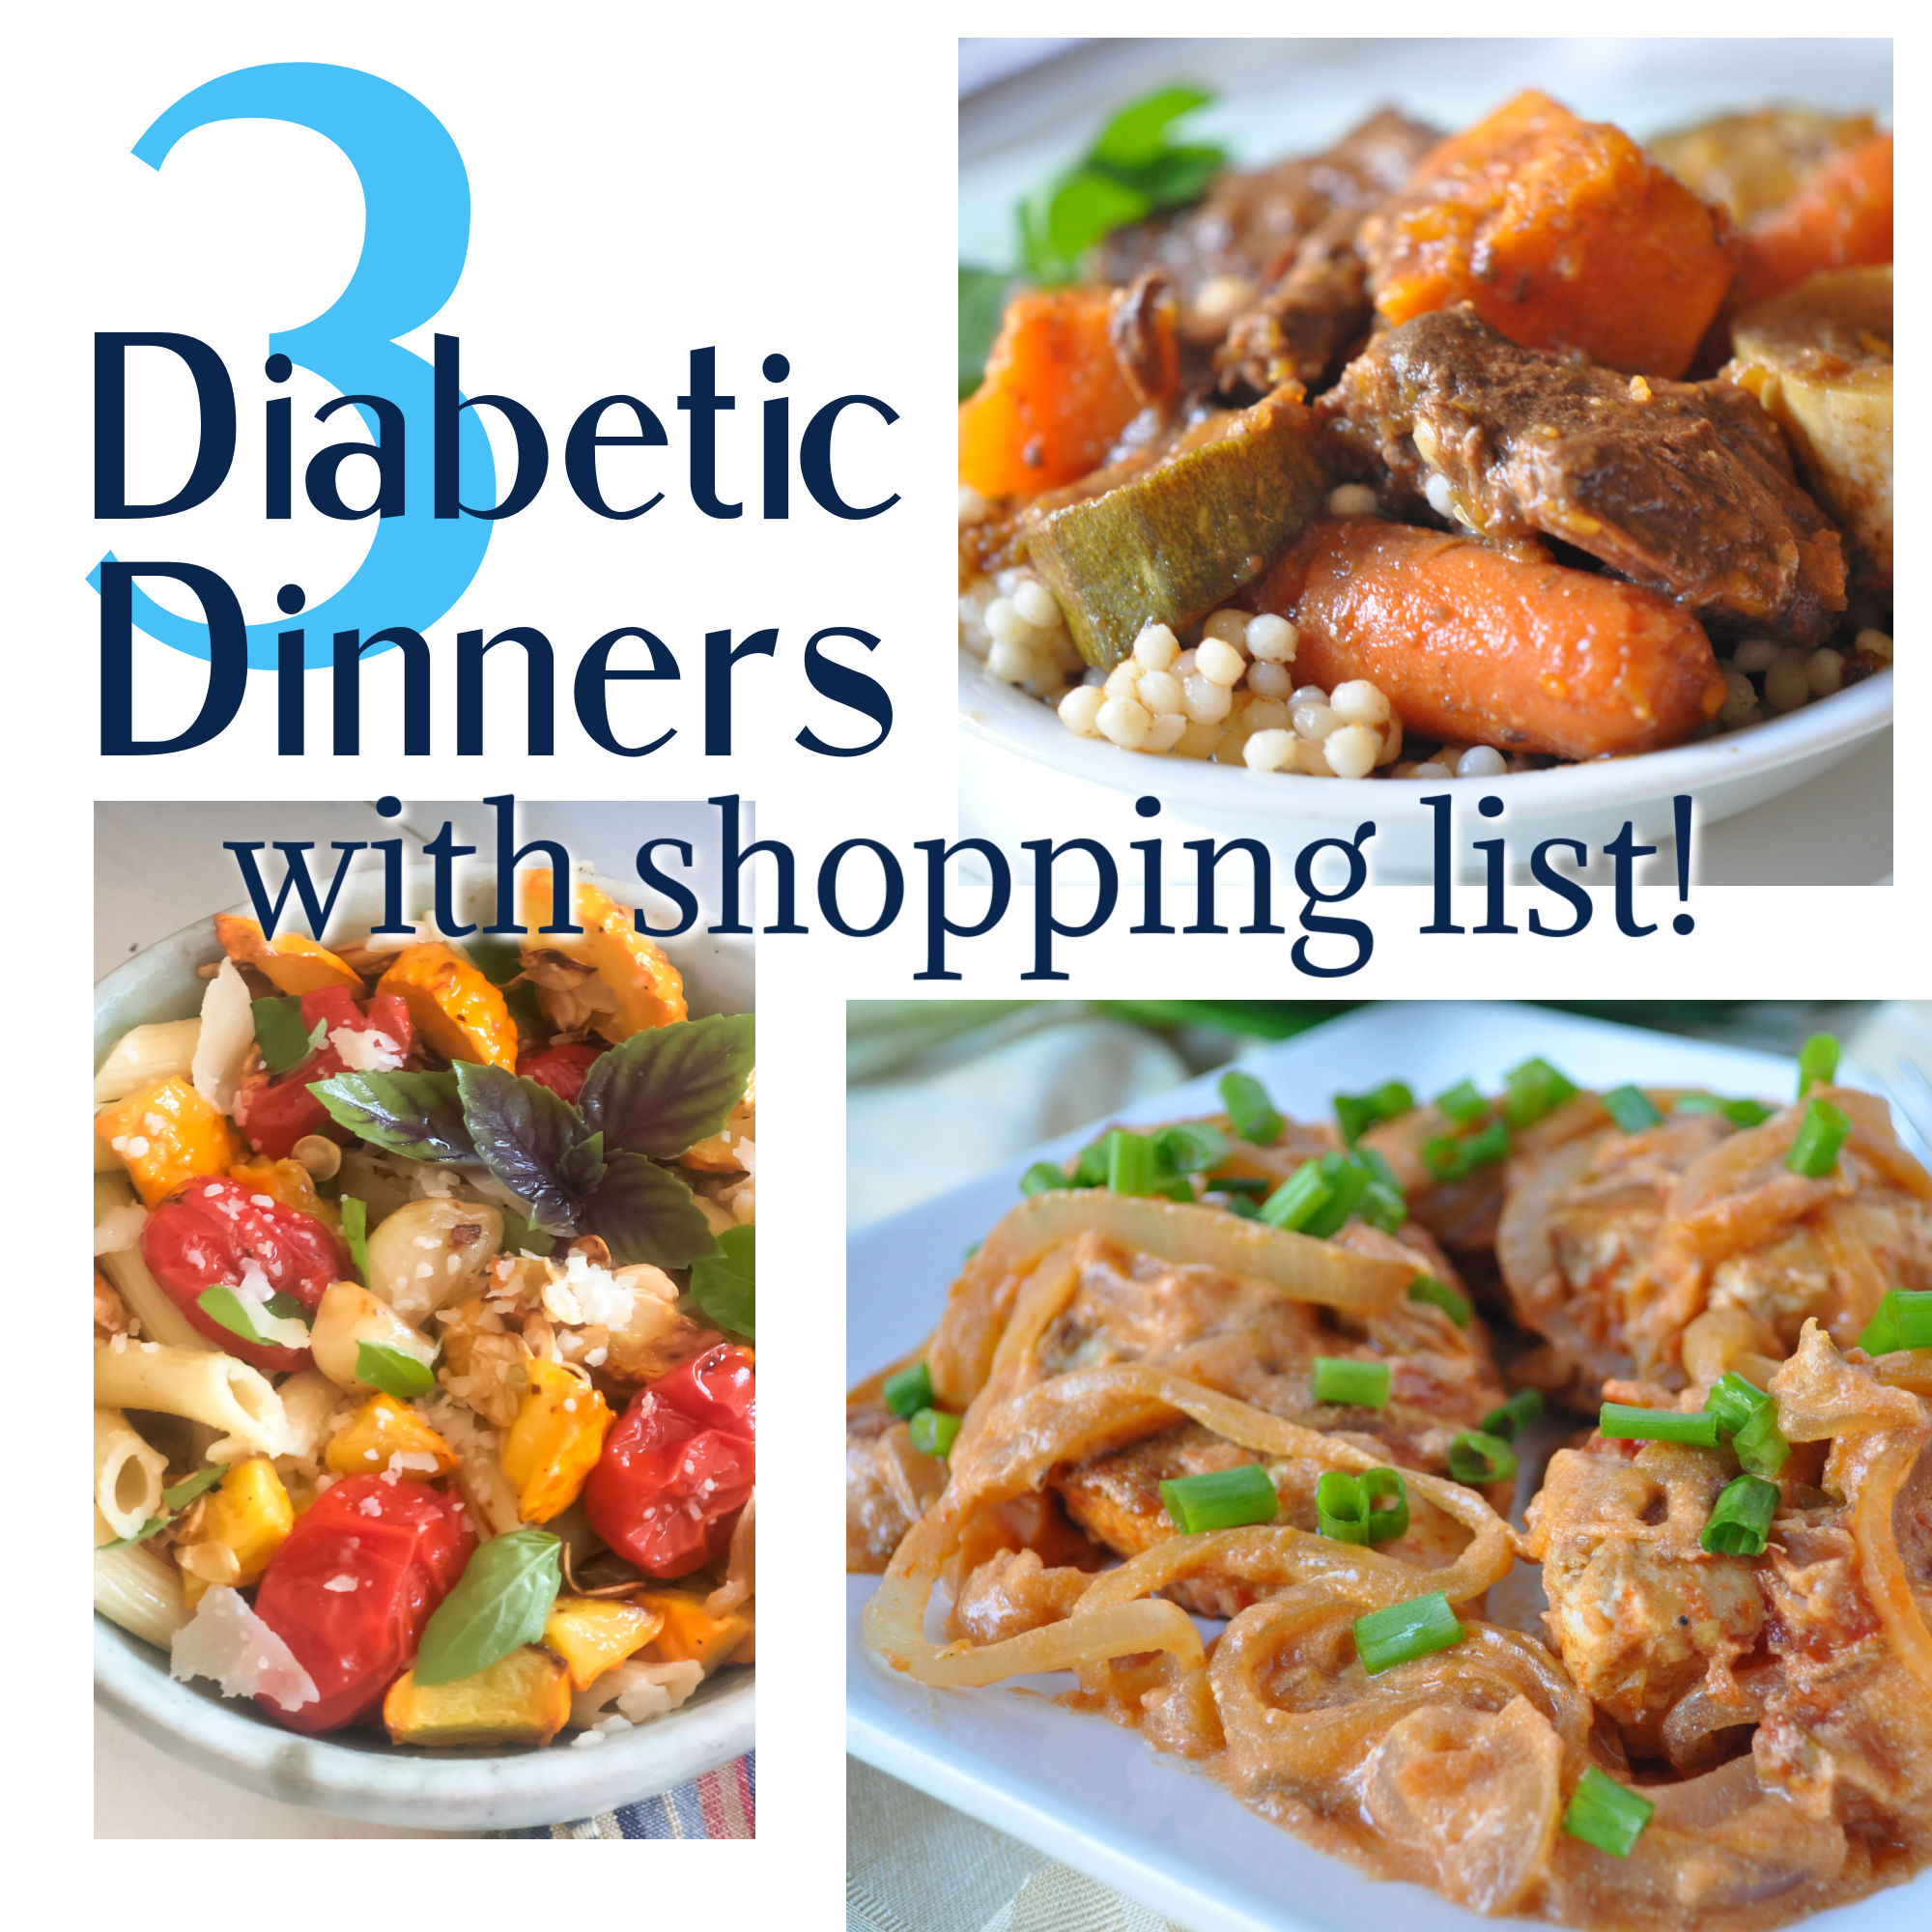 3 Diabetic Dinners with Shopping List